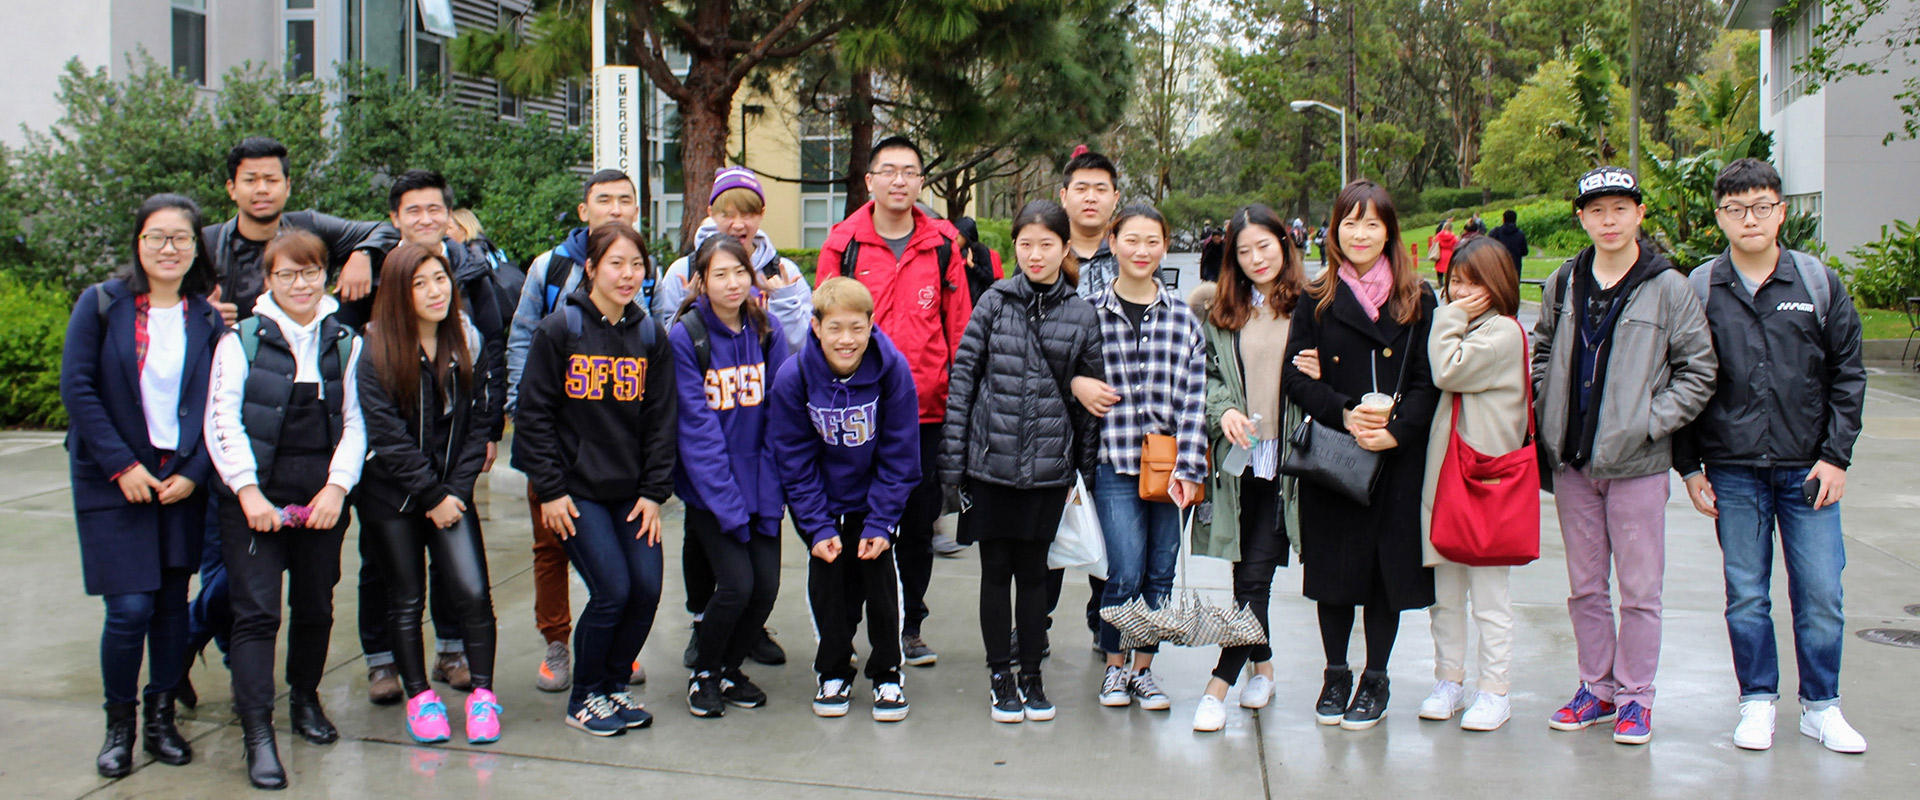 American Language Institute students on the SF State campus on a rainy day